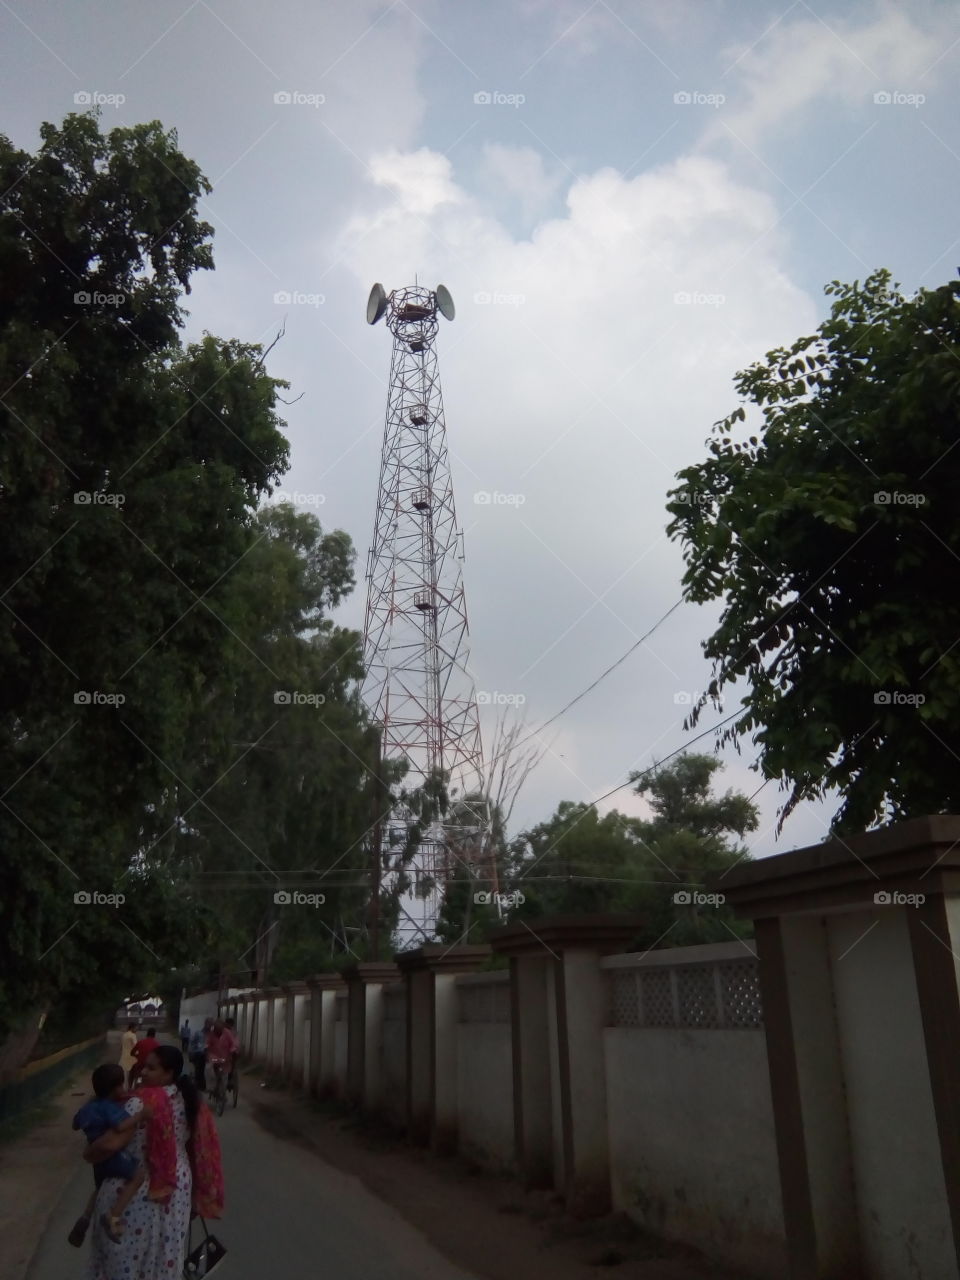 A very high microwave tower at Bathinda city.